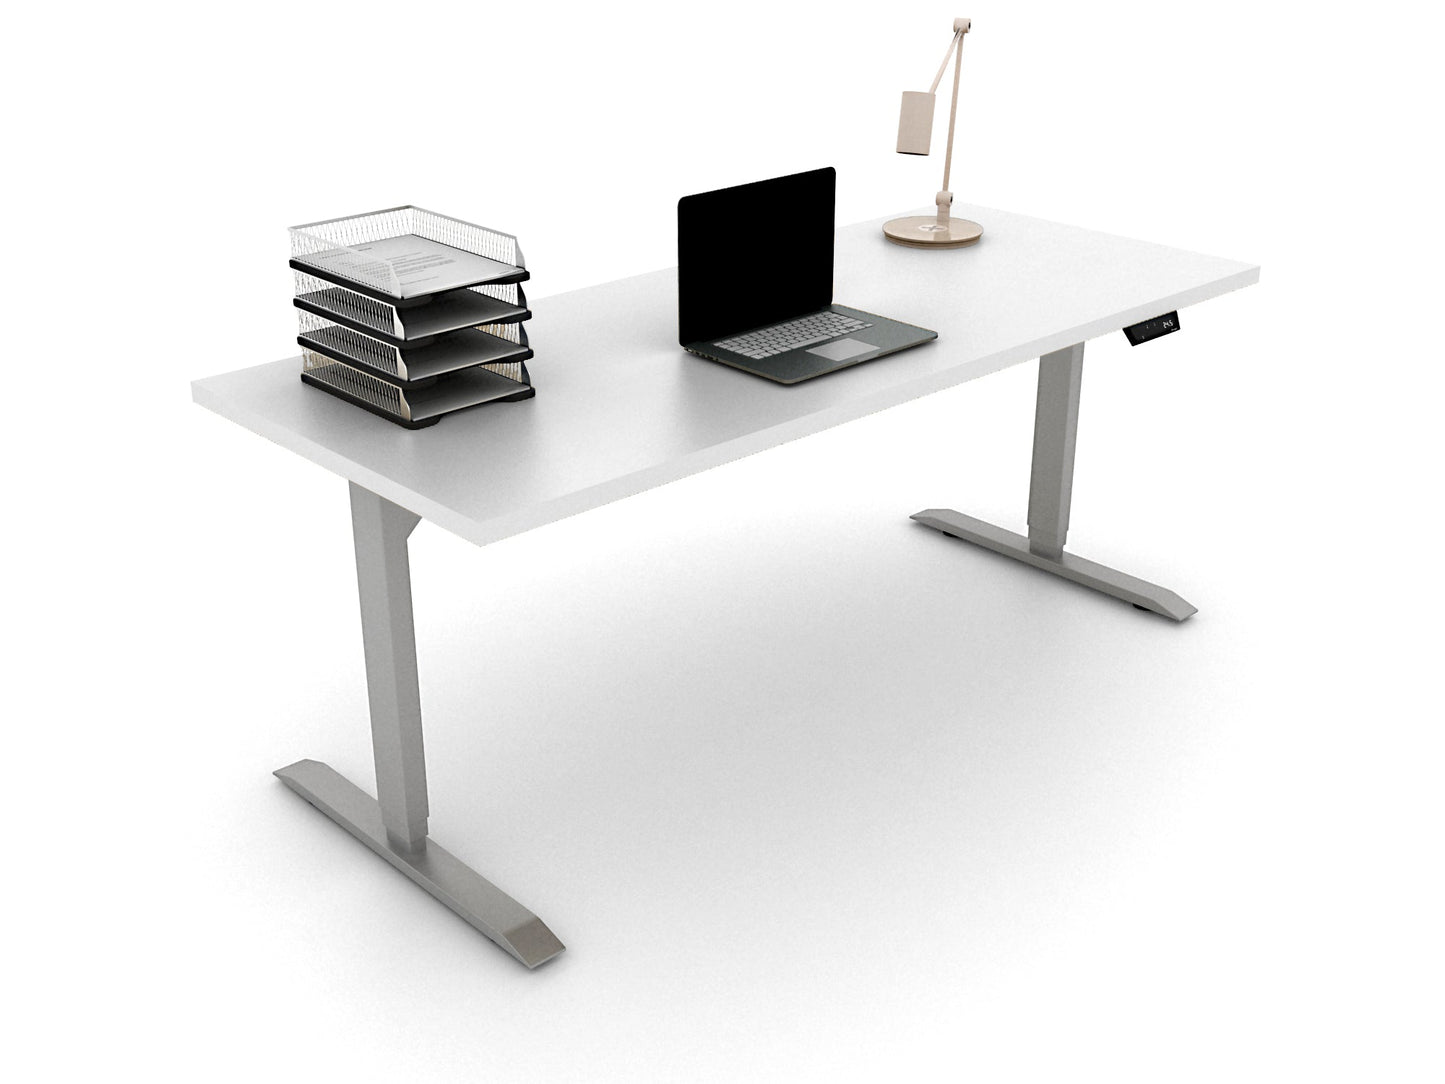 MyHite 2 Stage Height Adjustable Table Base by Friant - BASE ONLY - Wholesale Office Furniture